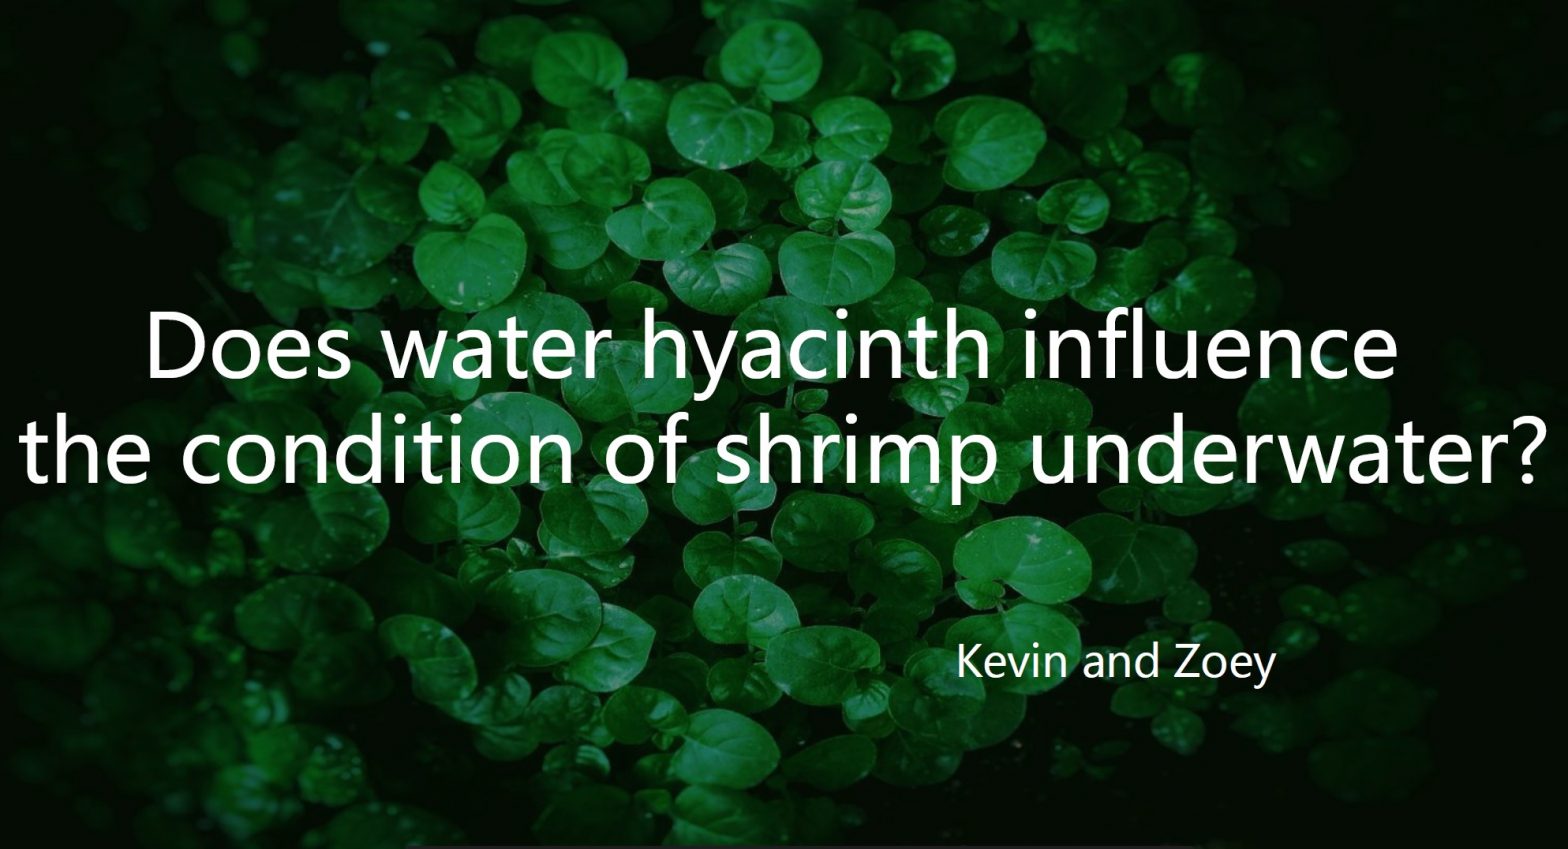 Does the Water Hyacinth Affect the Condition of Shrimp Under Water?